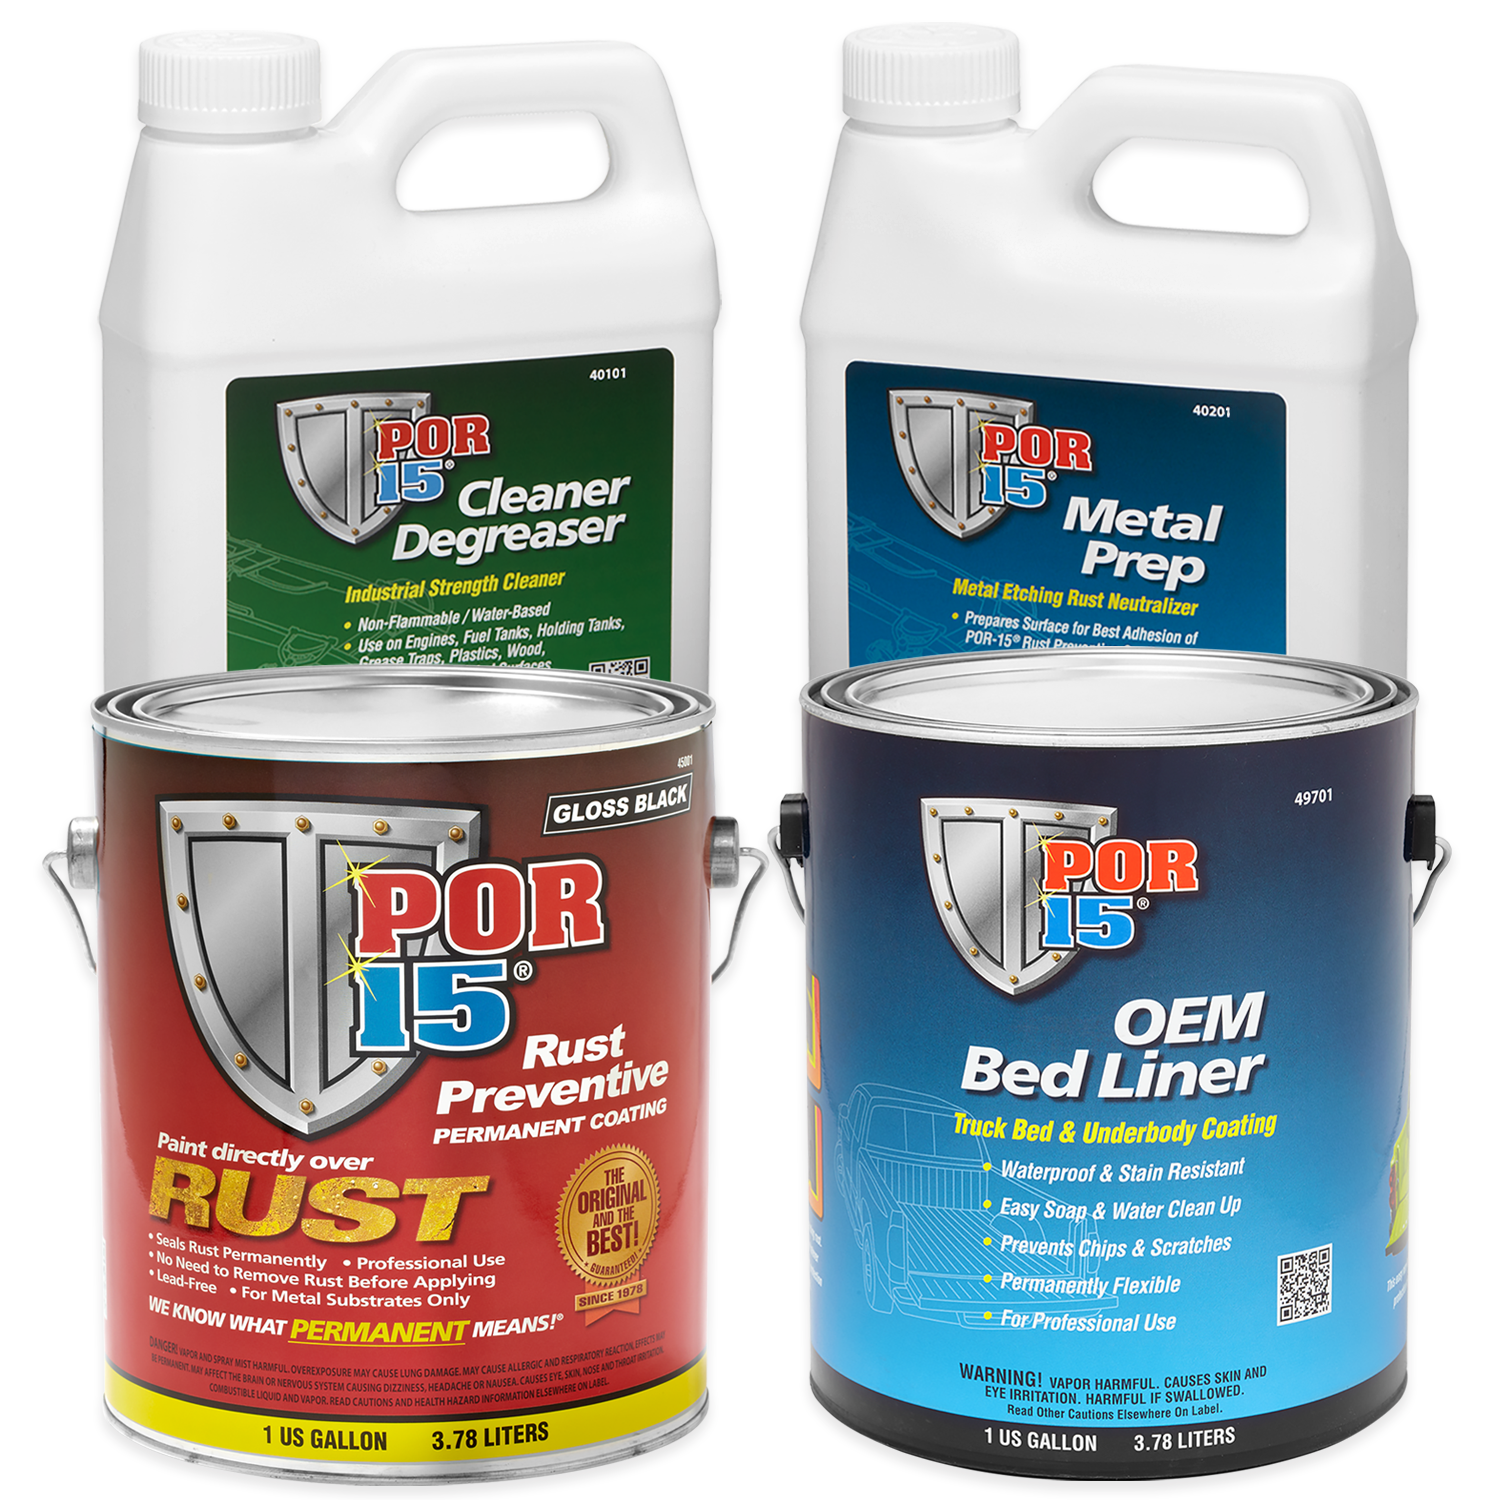 POR-15, Inc. - Got tough rust problems? POR-15 Rubberized Under Coating is  a flexible, paintable, textured black coating that protects against  moisture, salt, chemicals, dust, heat, and cold. This paint for metal